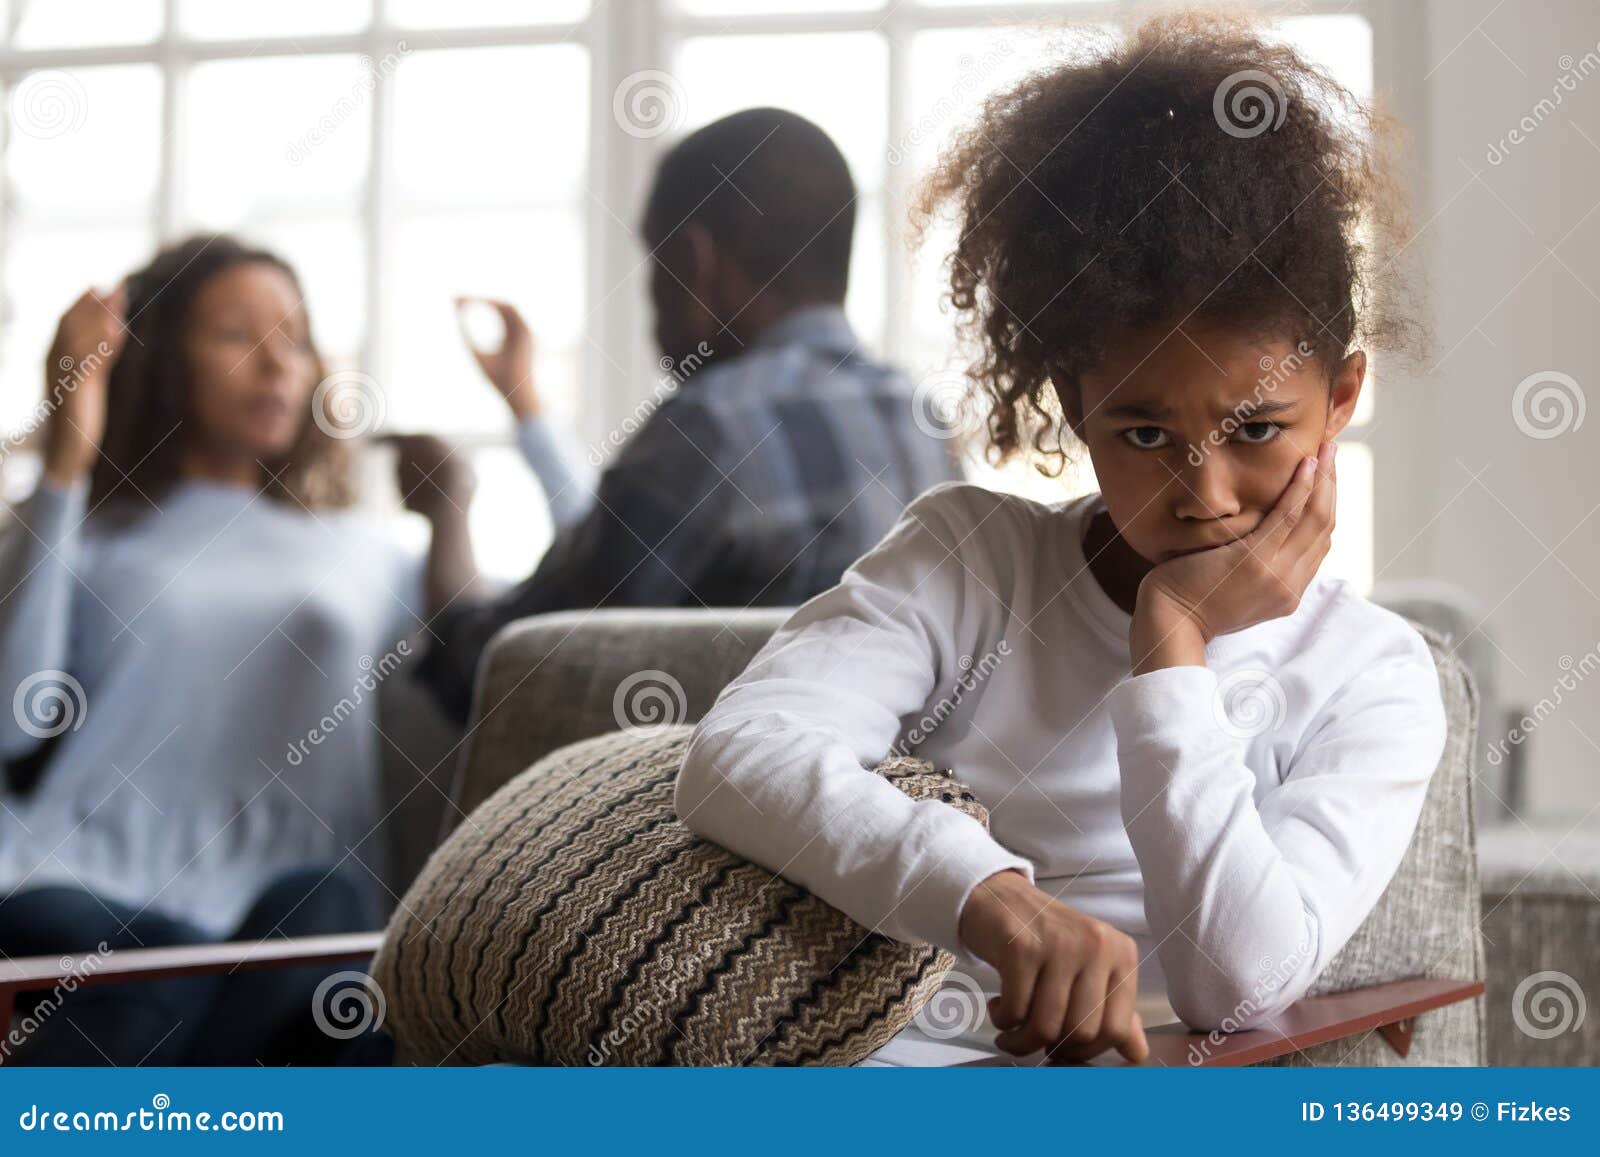 african kid daughter upset of parents fighting looking at camera